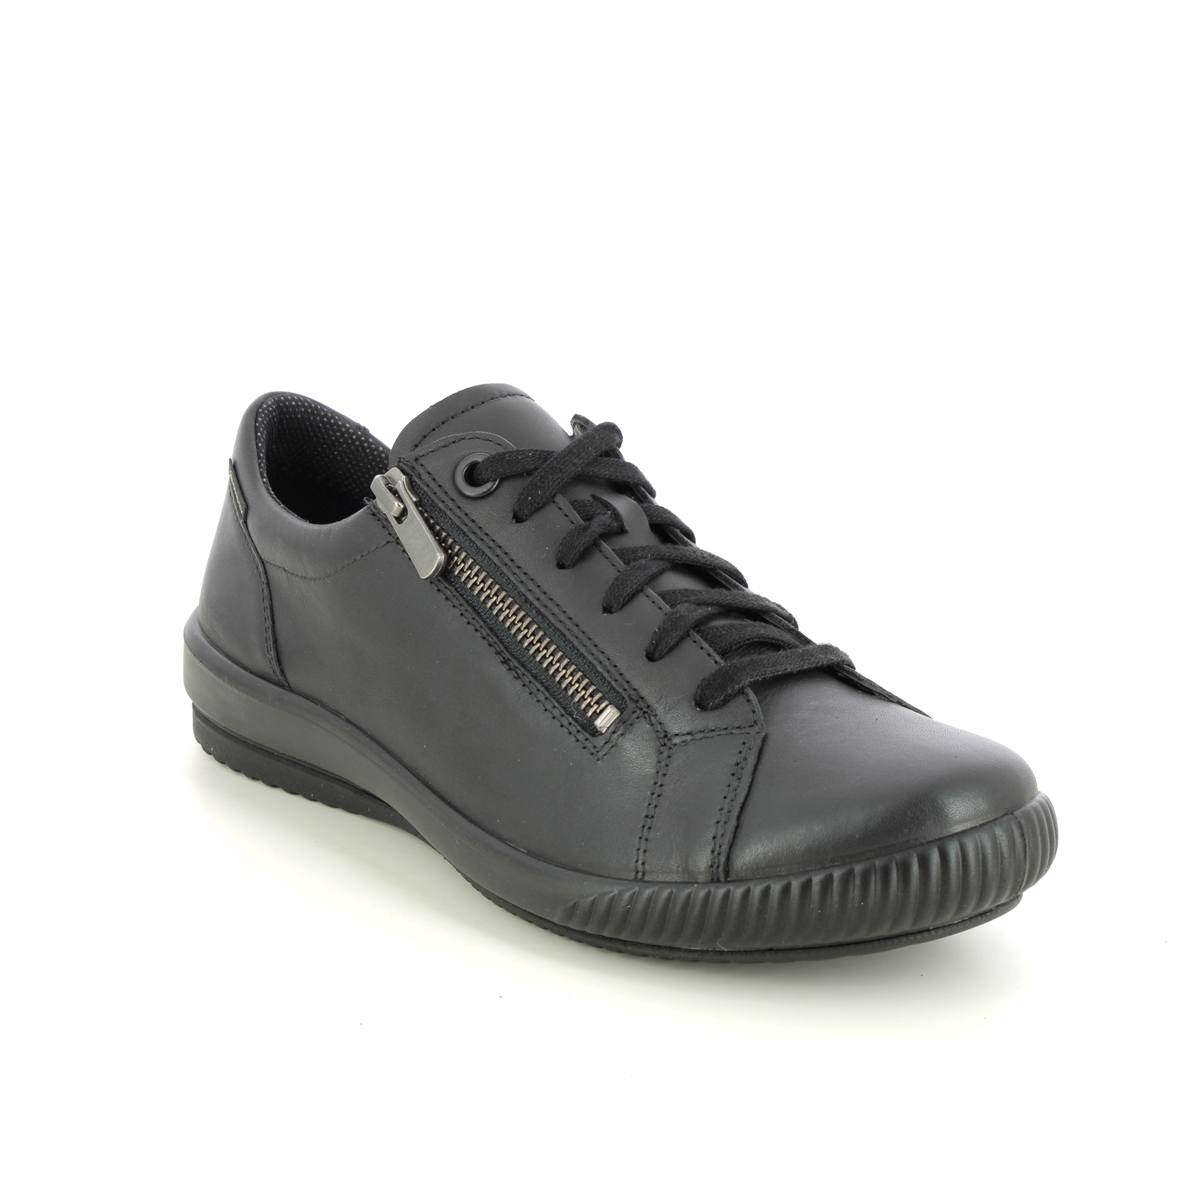 Legero Tanaro Gtx Zip Black Leather Womens Lacing Shoes 2000219-0200 In Size 6 In Plain Black Leather